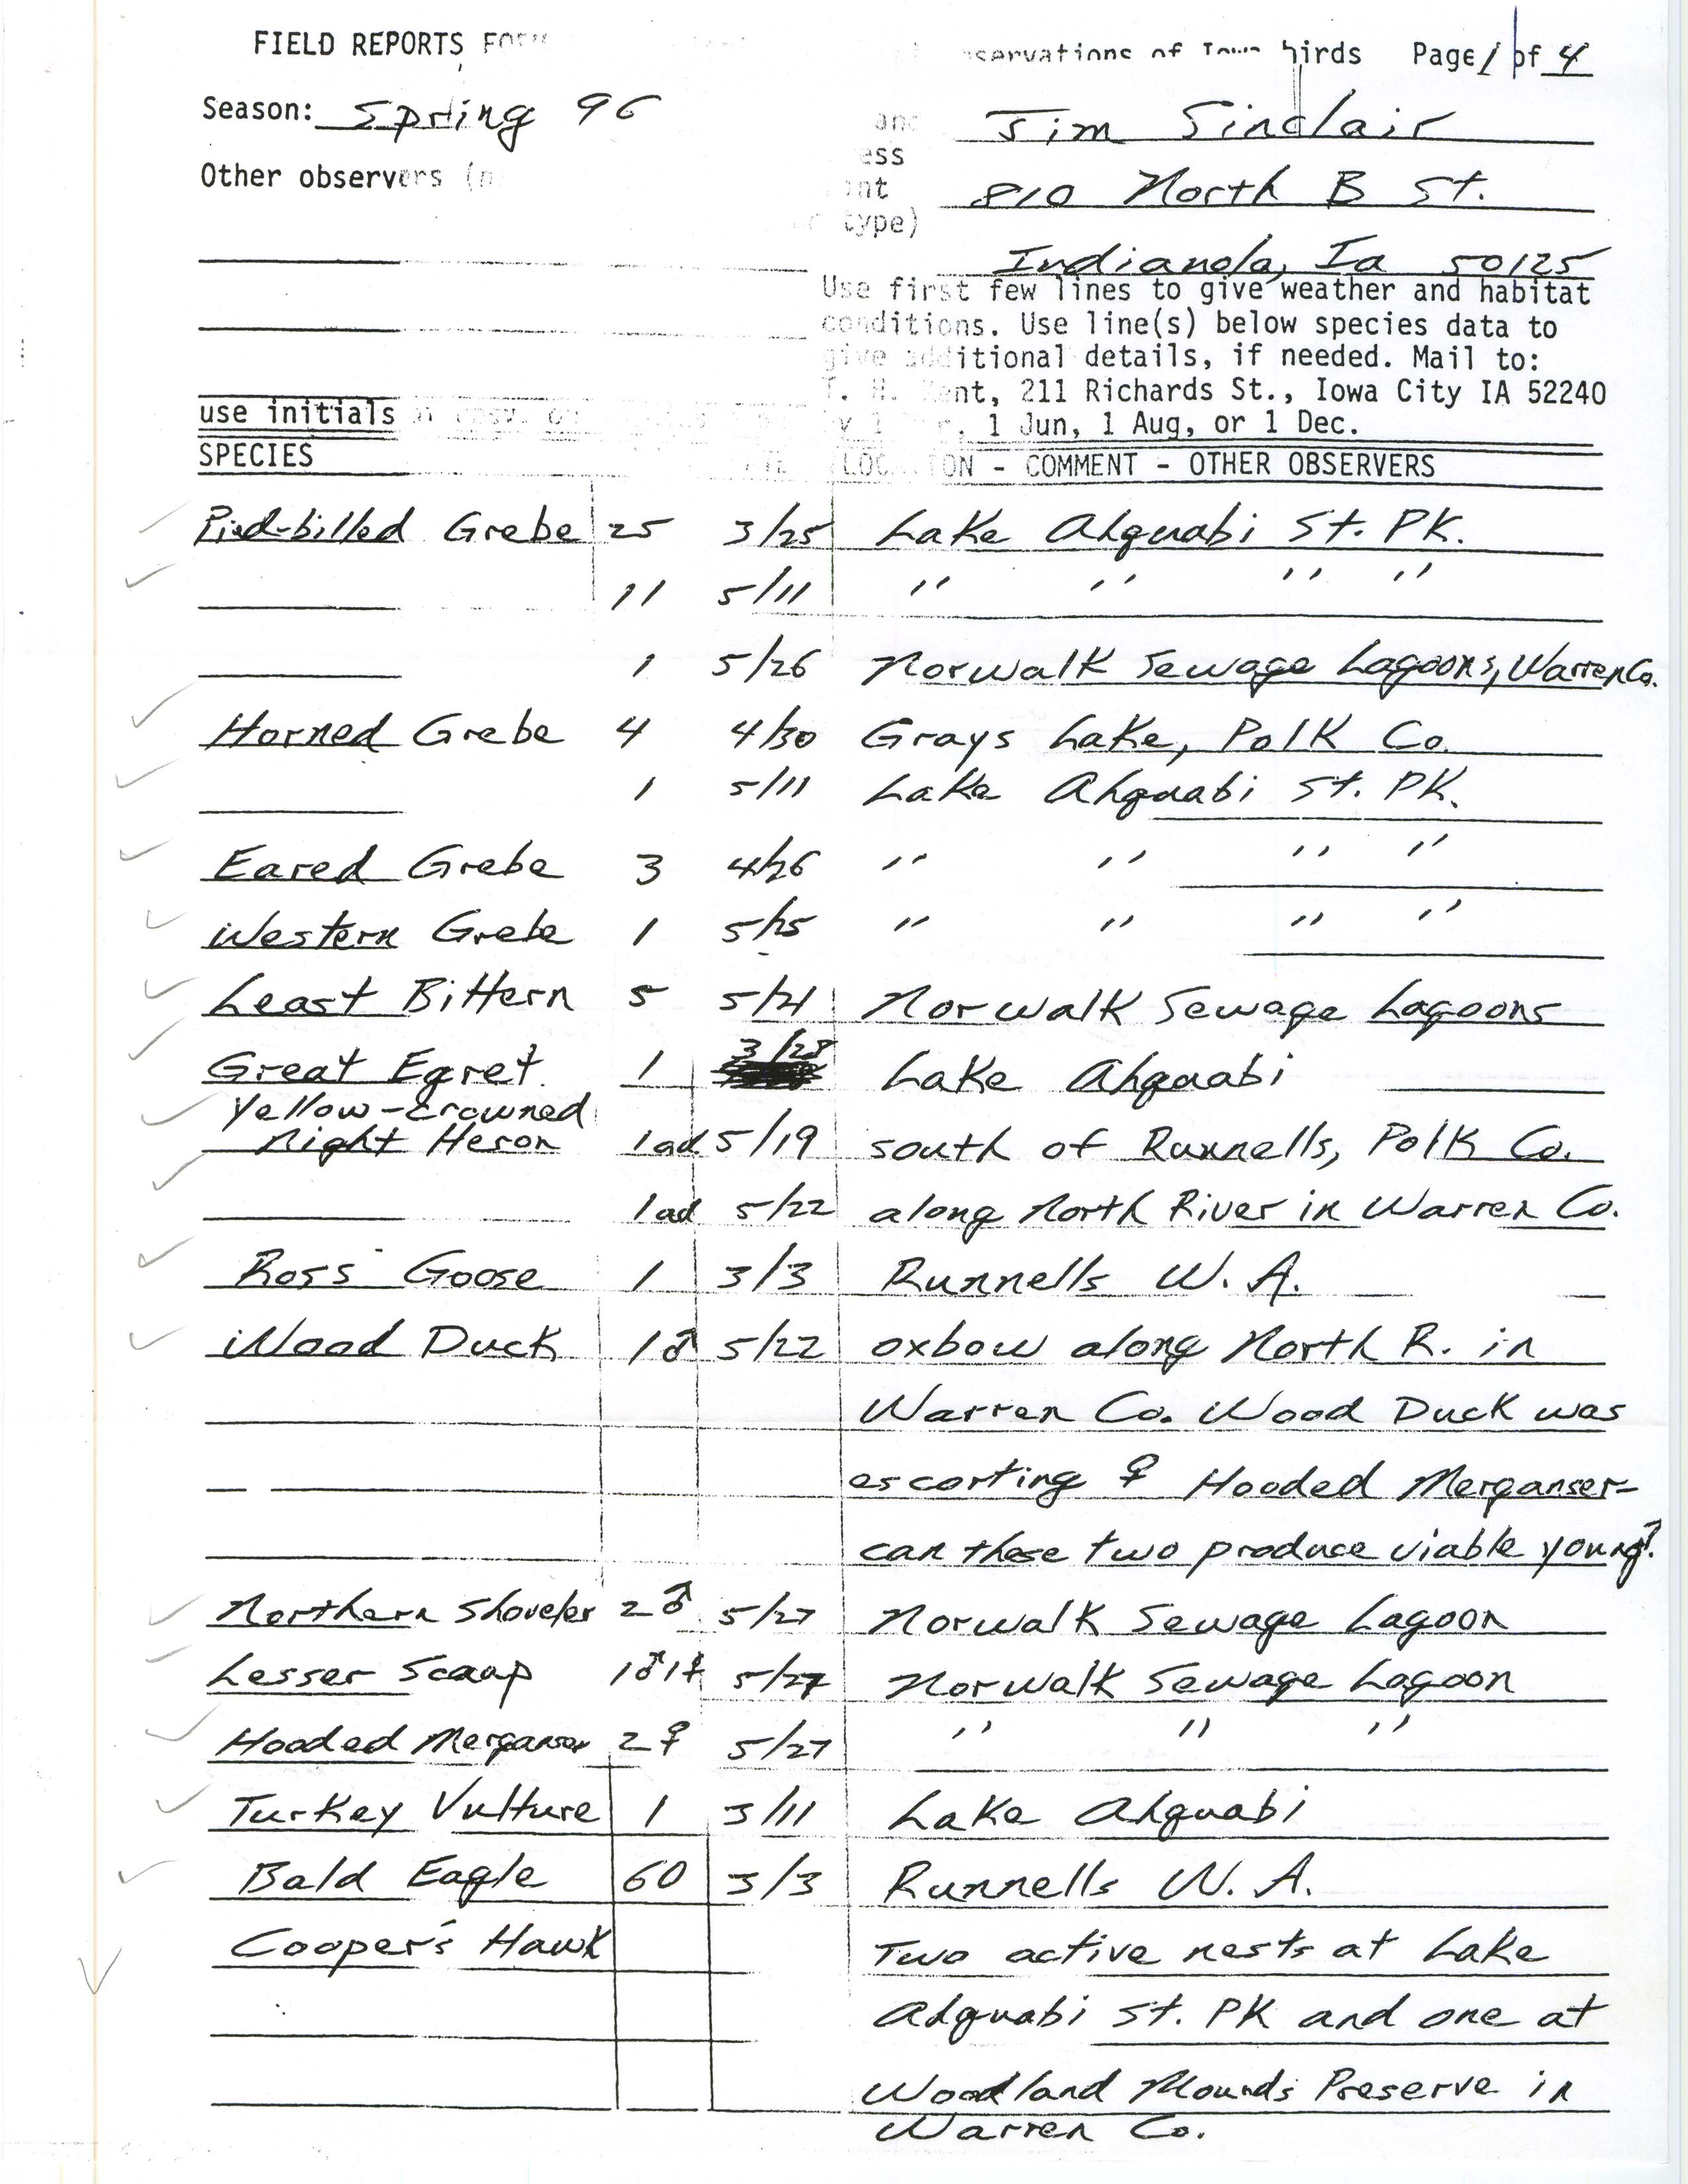 Field reports form for submitting seasonal observations of Iowa birds, Jim Sinclair, spring 1996